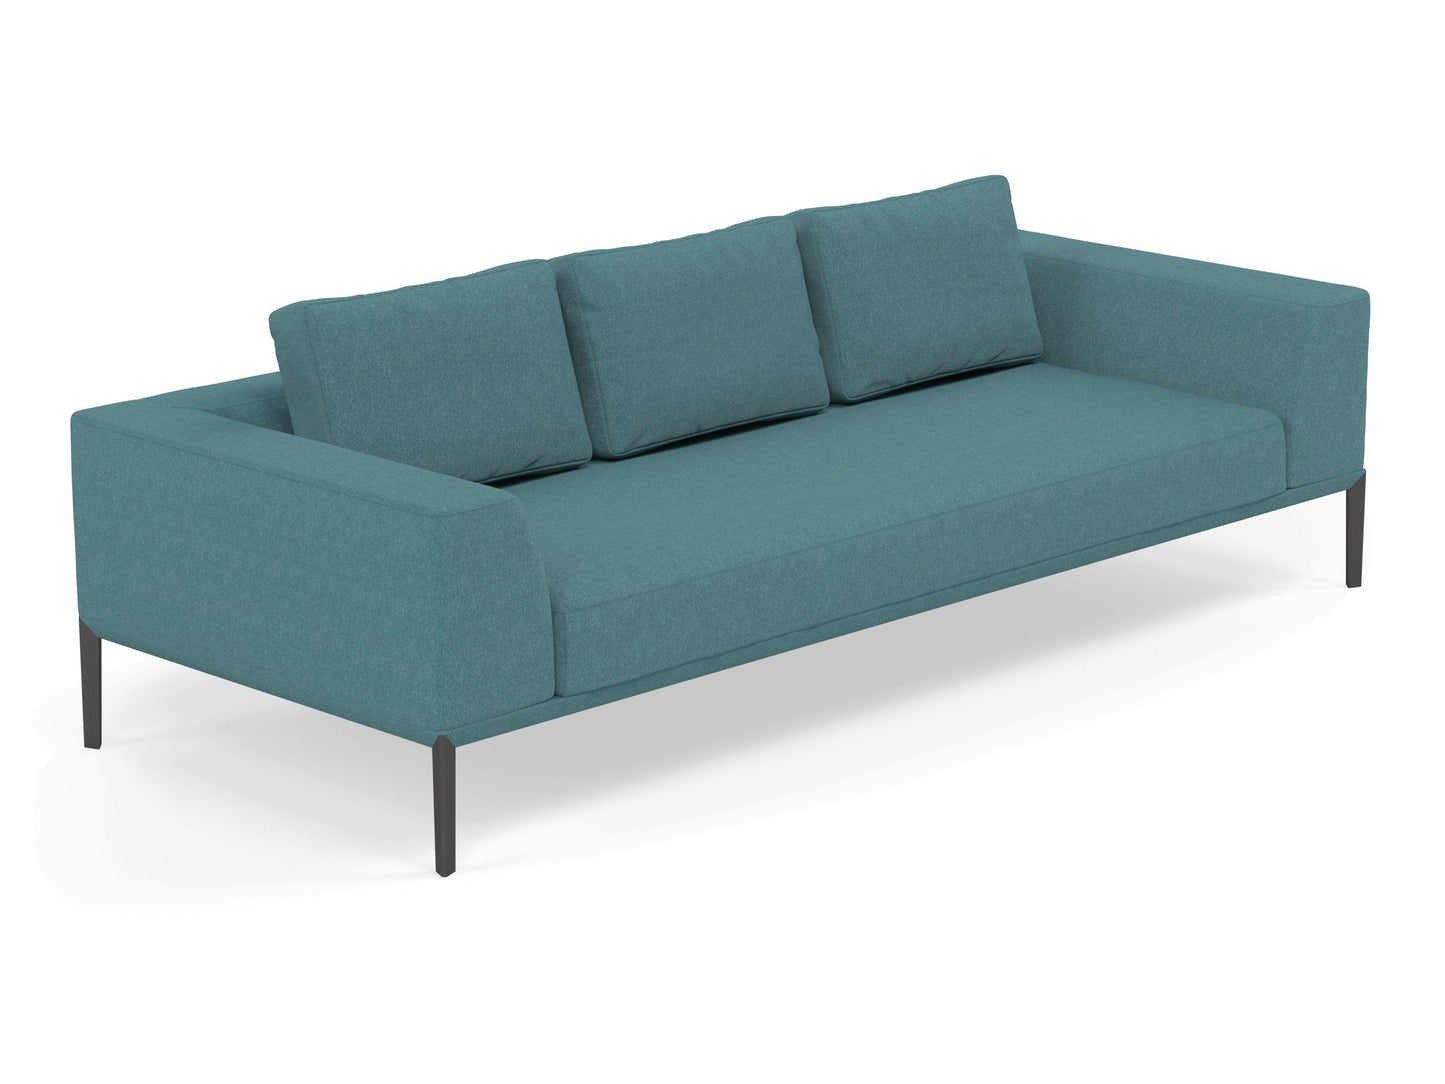 Modern 3 Seater Sofa with 2 Armrests in Teal Blue Fabric-Distinct Designs (London) Ltd